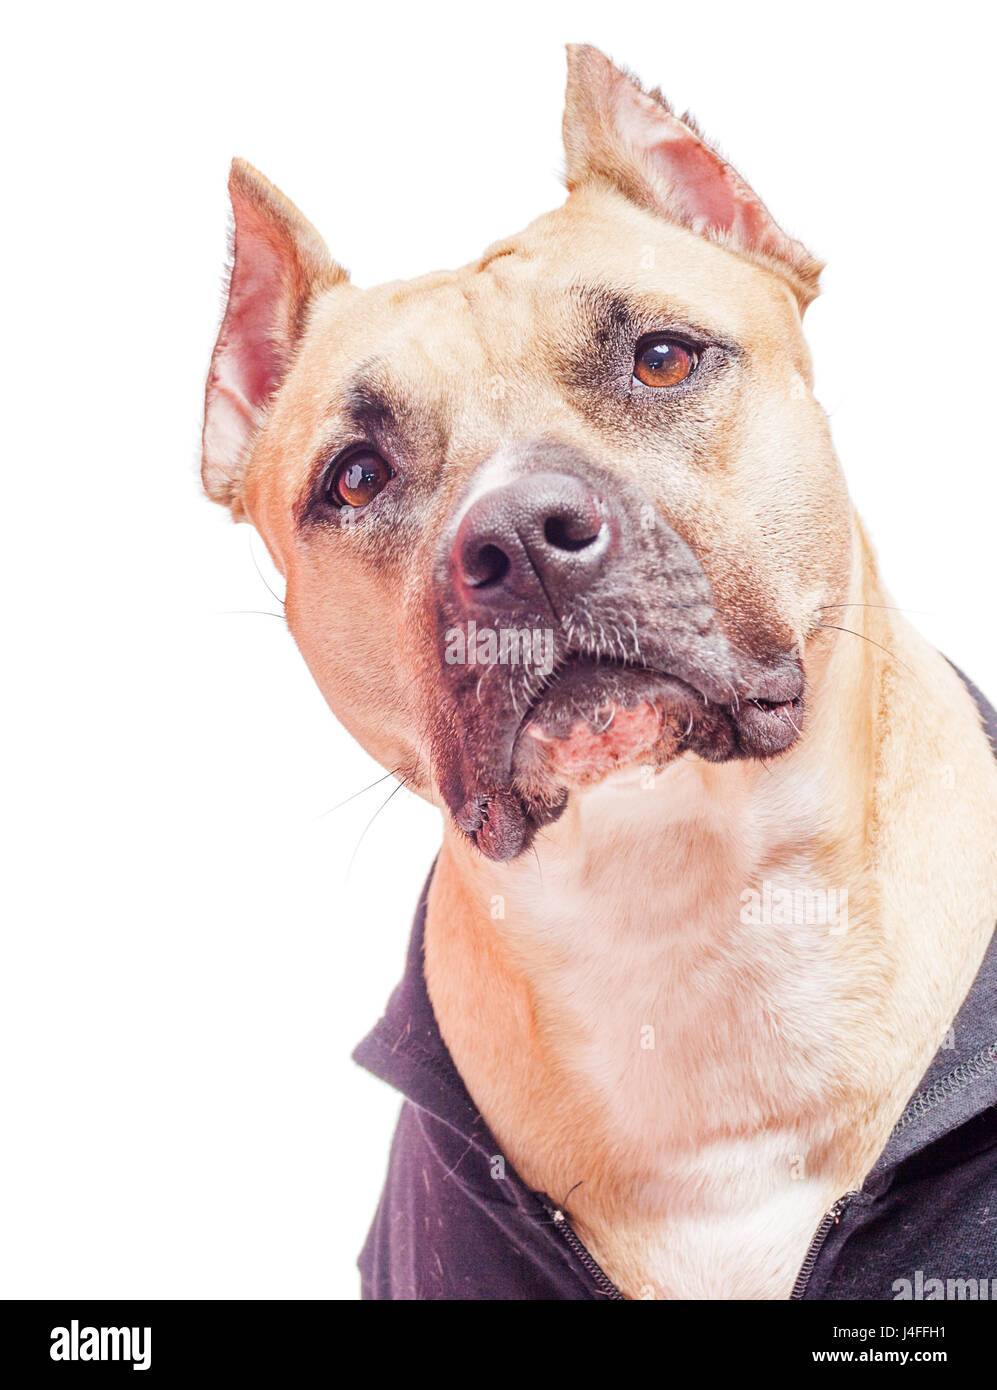 American Staffordshire Bull Terrier portrait isolated on white Banque D'Images